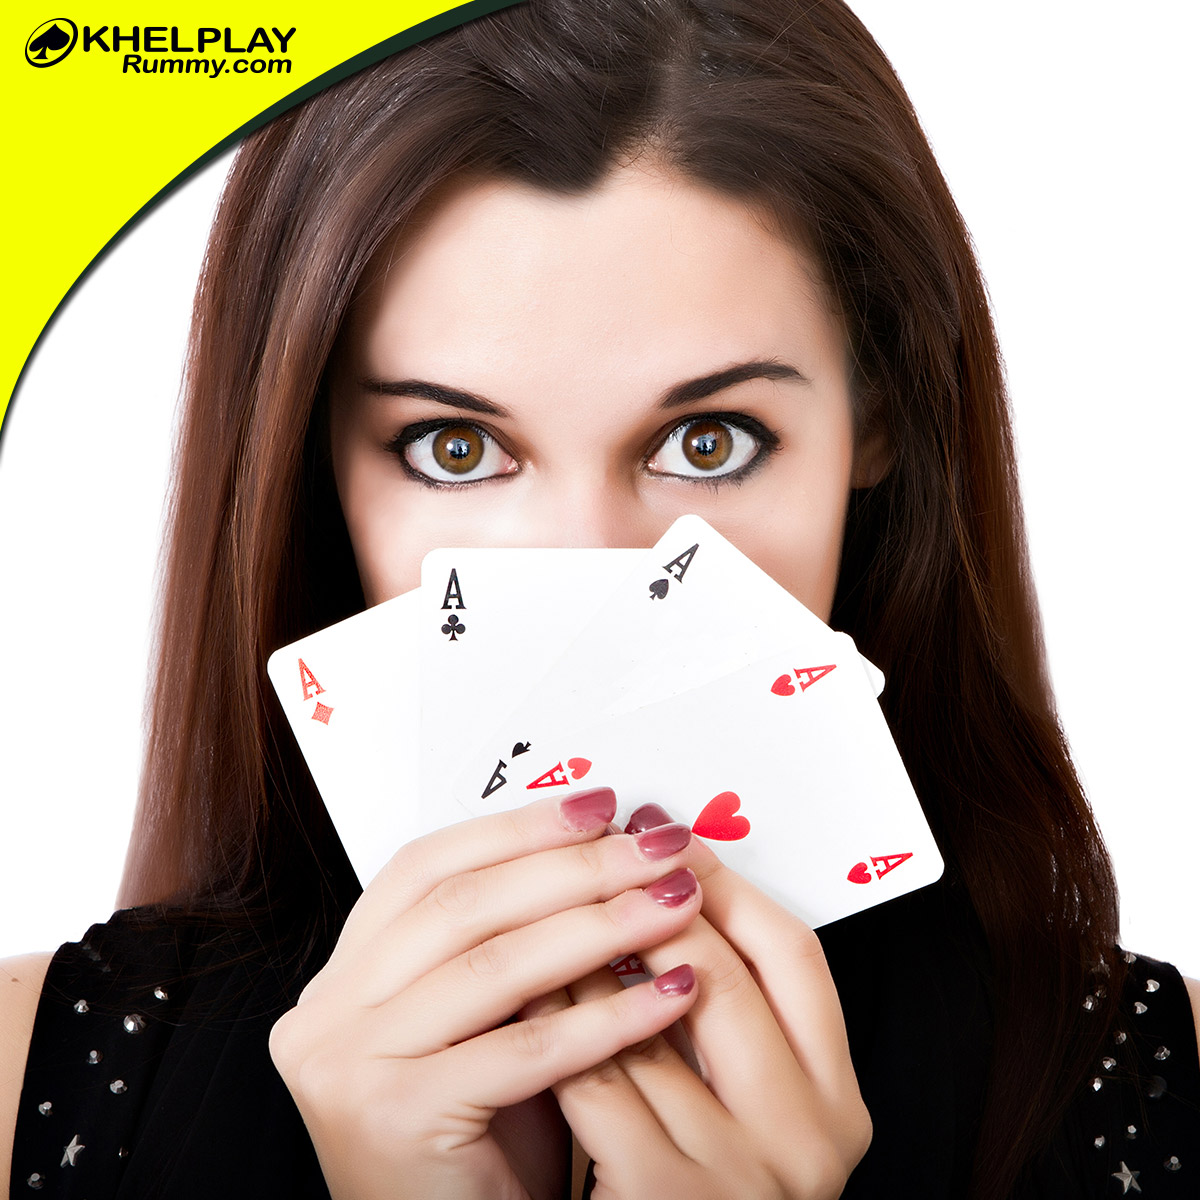 The Cards Of A Rummy Player